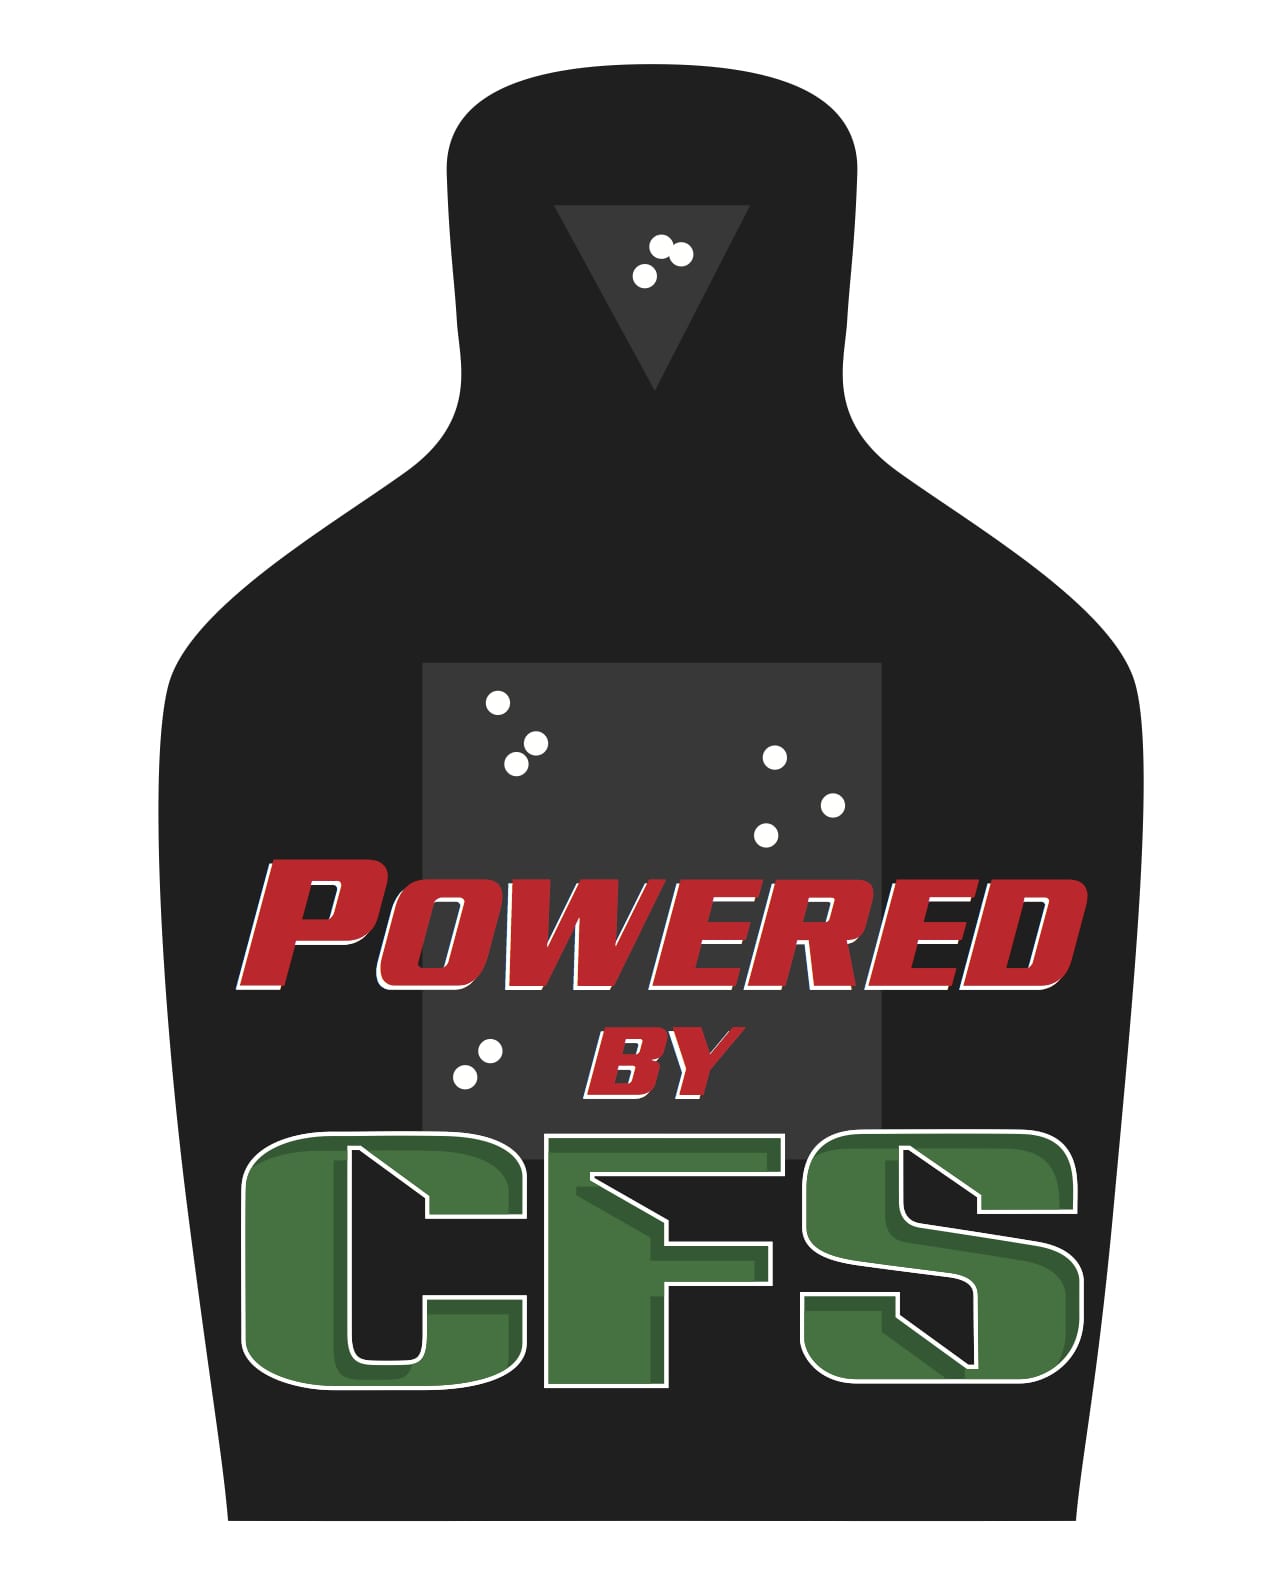 CFS Logo - What is this “Powered by CFS” logo?. Intuitive Defensive Shooting